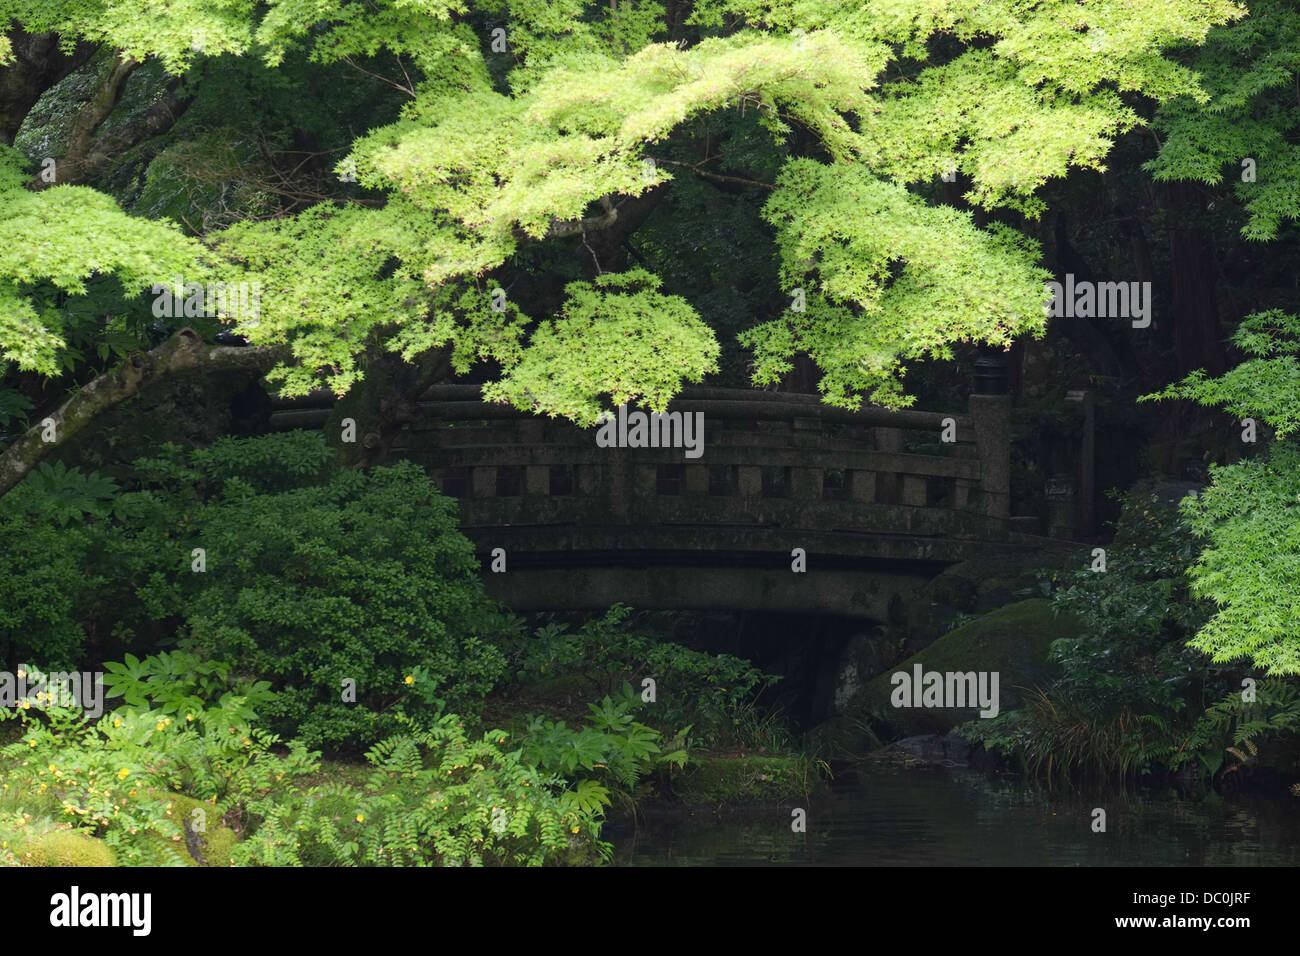 Hidden bridge surrounded by trees in a Japanese temple. Stock Photo